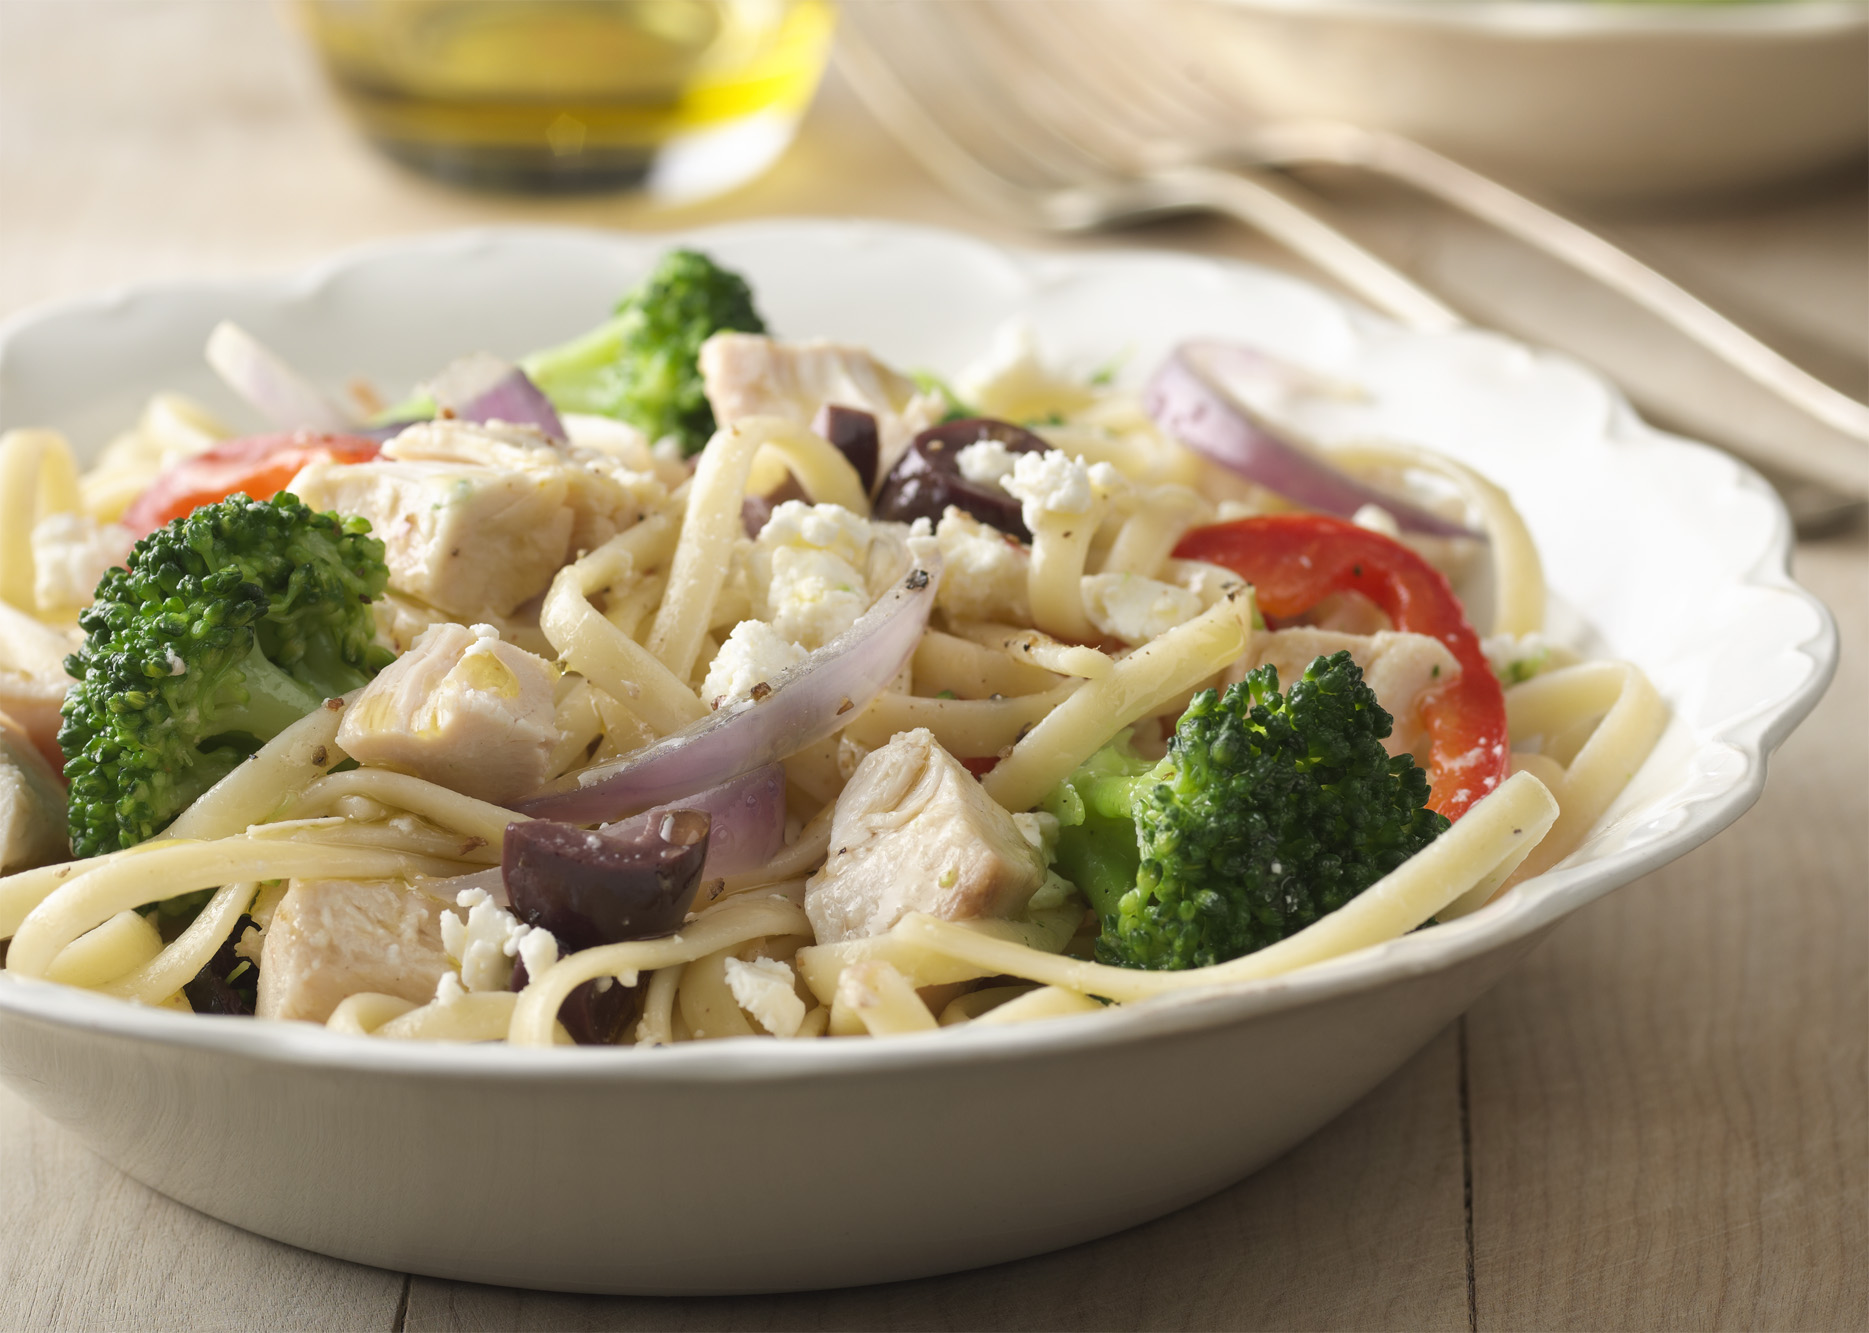 Linguine with Chicken, Broccoli, & Olives